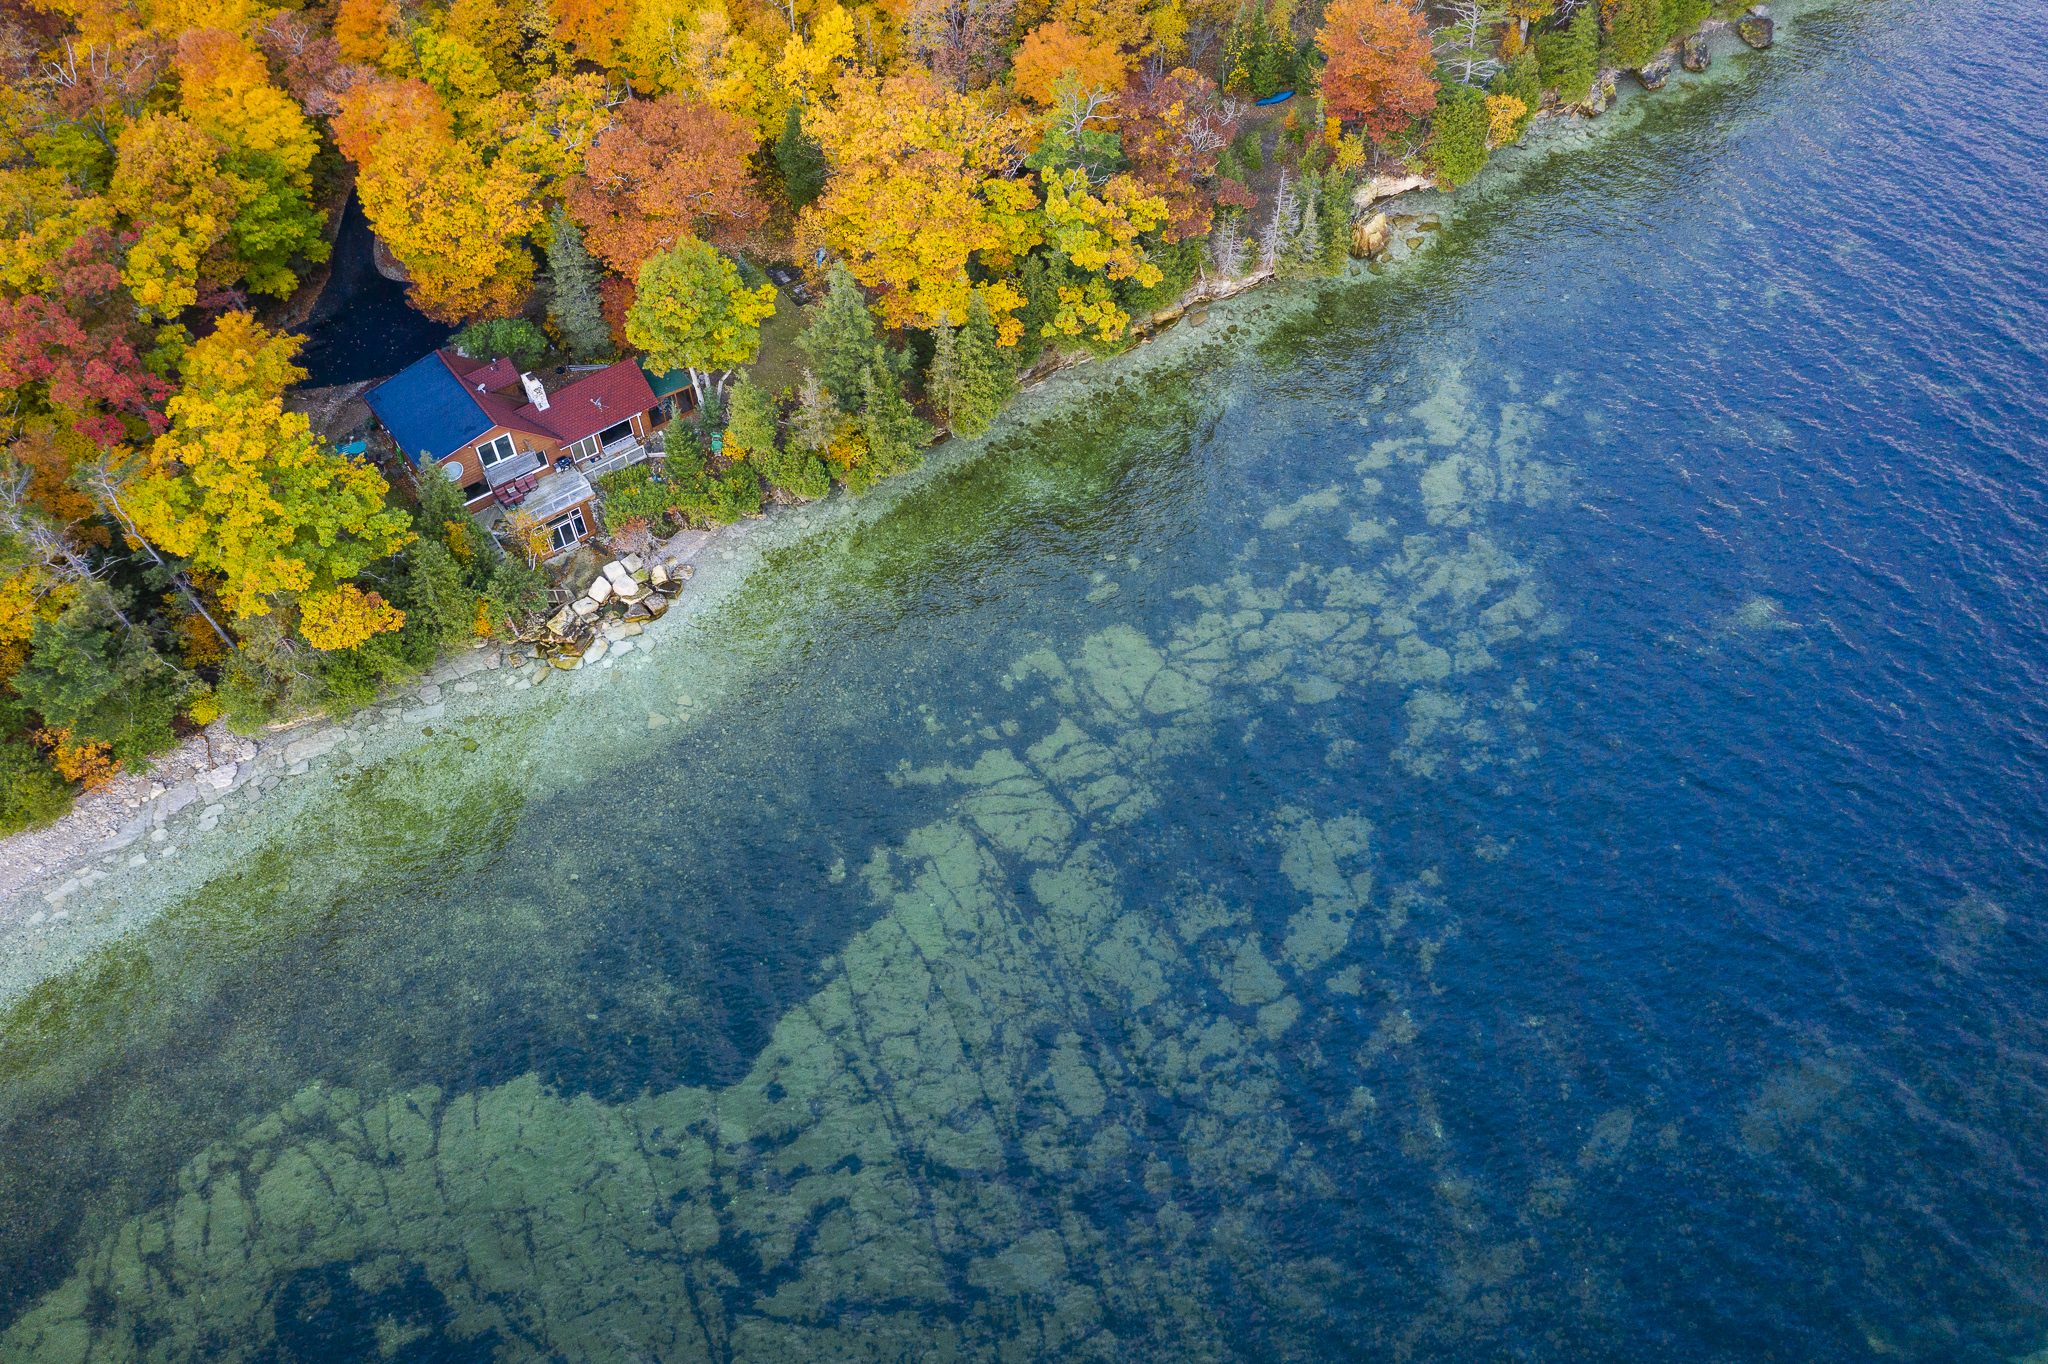 Where to stay in the fall in Door County